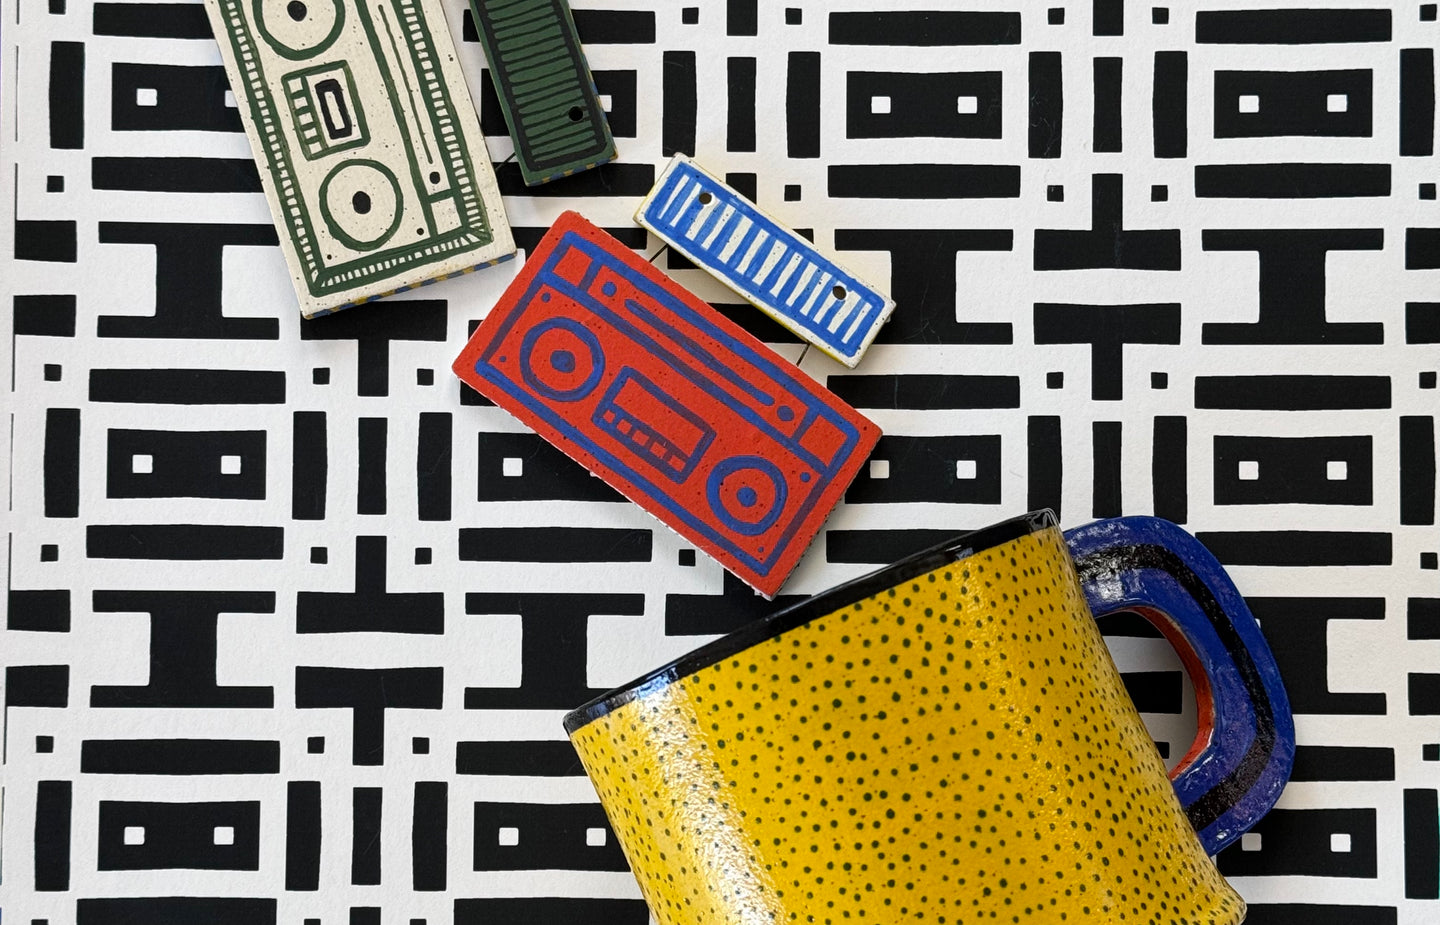 colorful ceramic boombox medallions spilling out of a yellow polka dot mug on top of a black and white pattern background that looks like cassette tapes